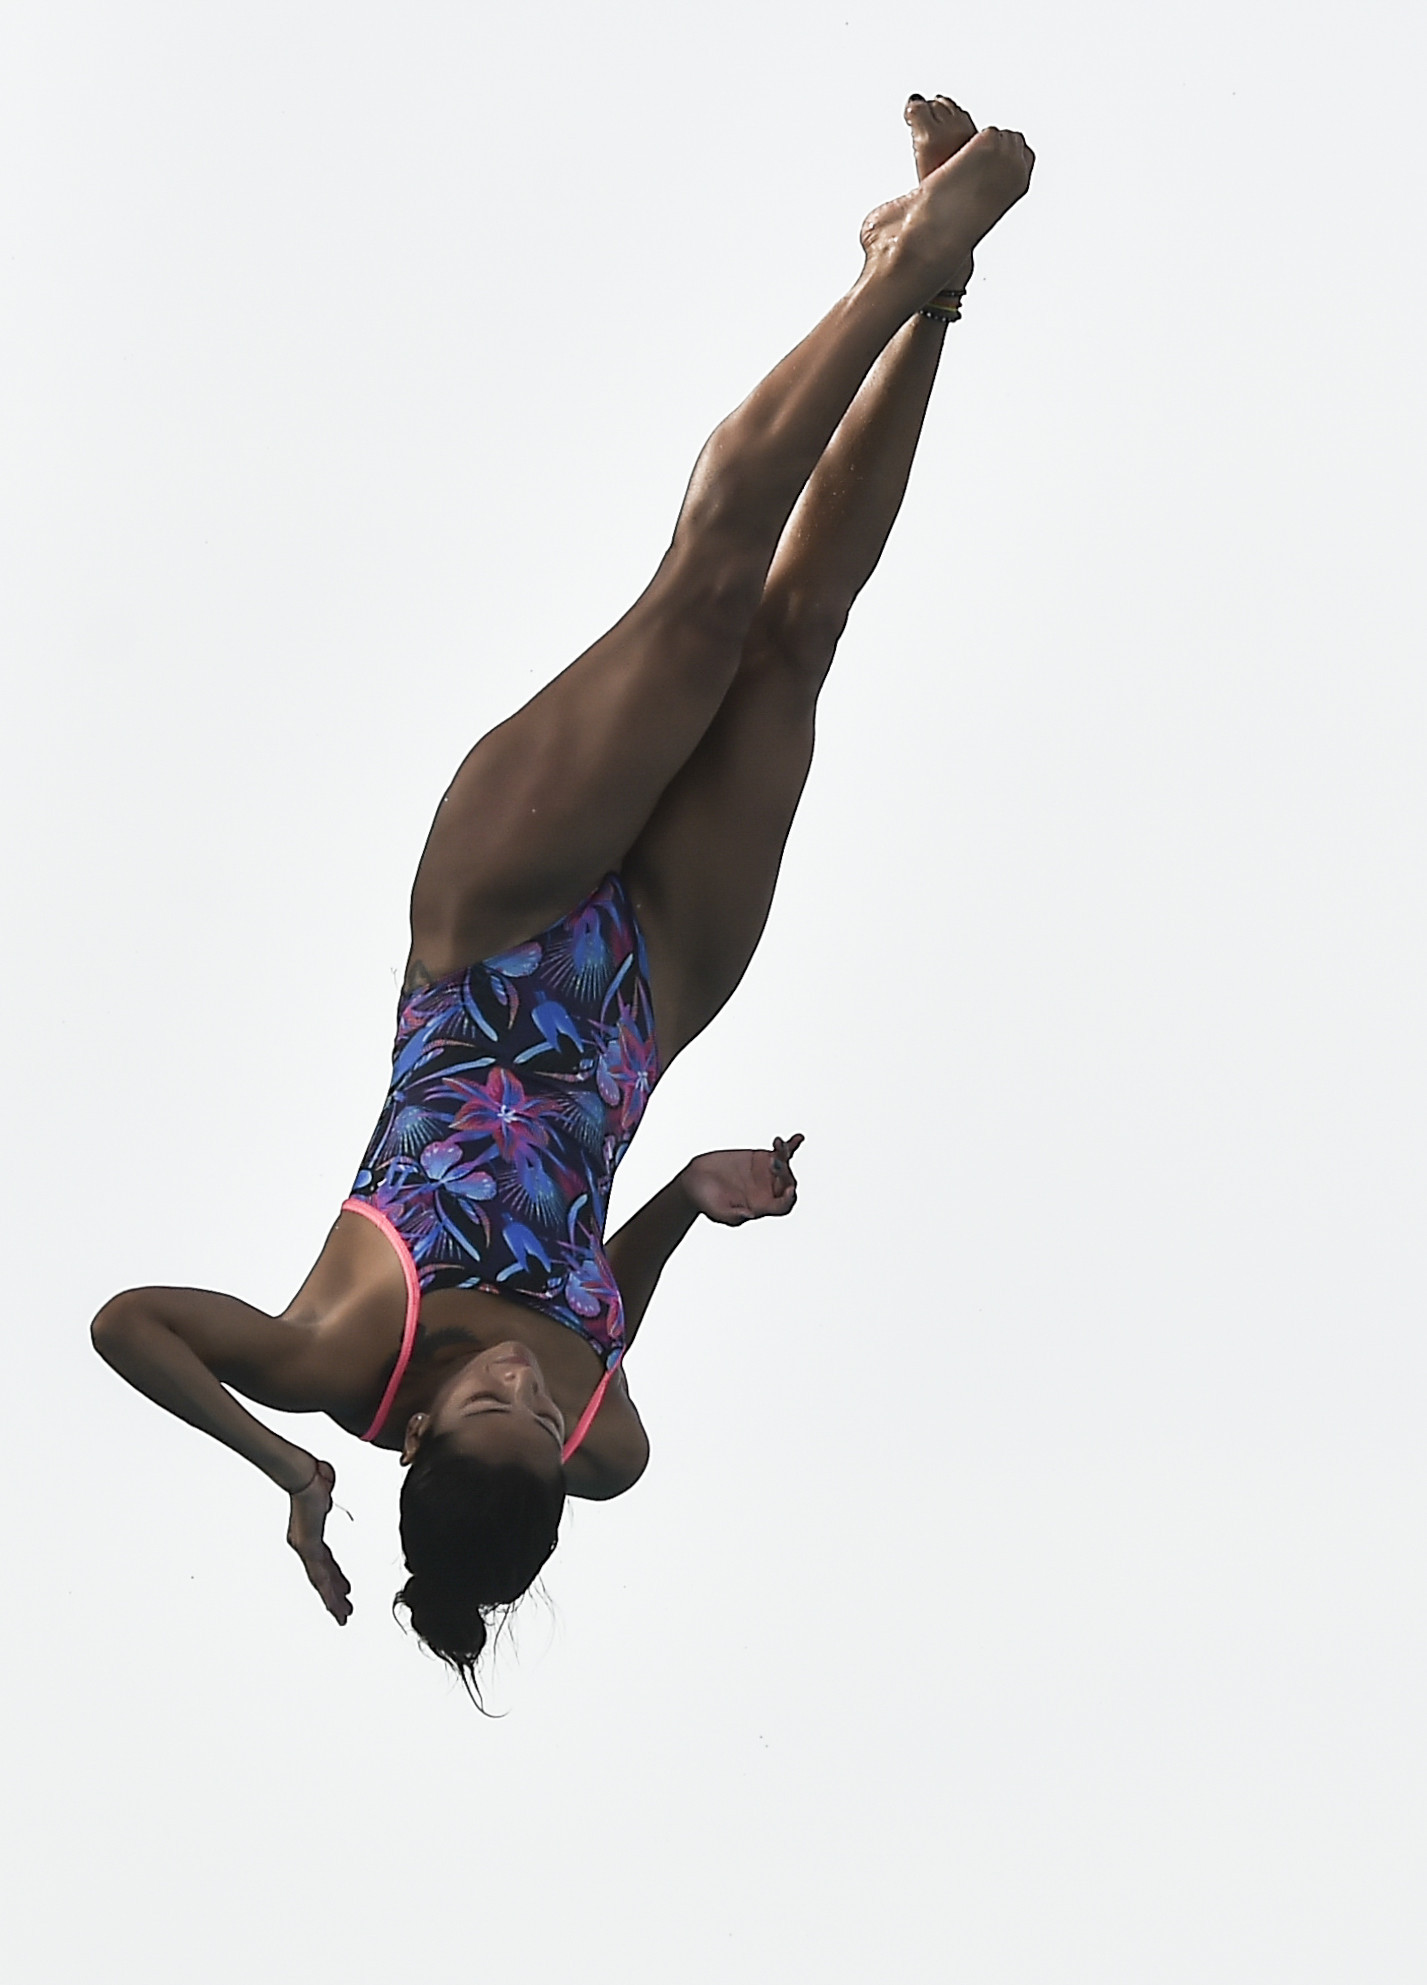 Diana Pineda was one of 10 gold medallists for hosts Colombia today, winning the women's 1m springboard diving event ©Getty Images